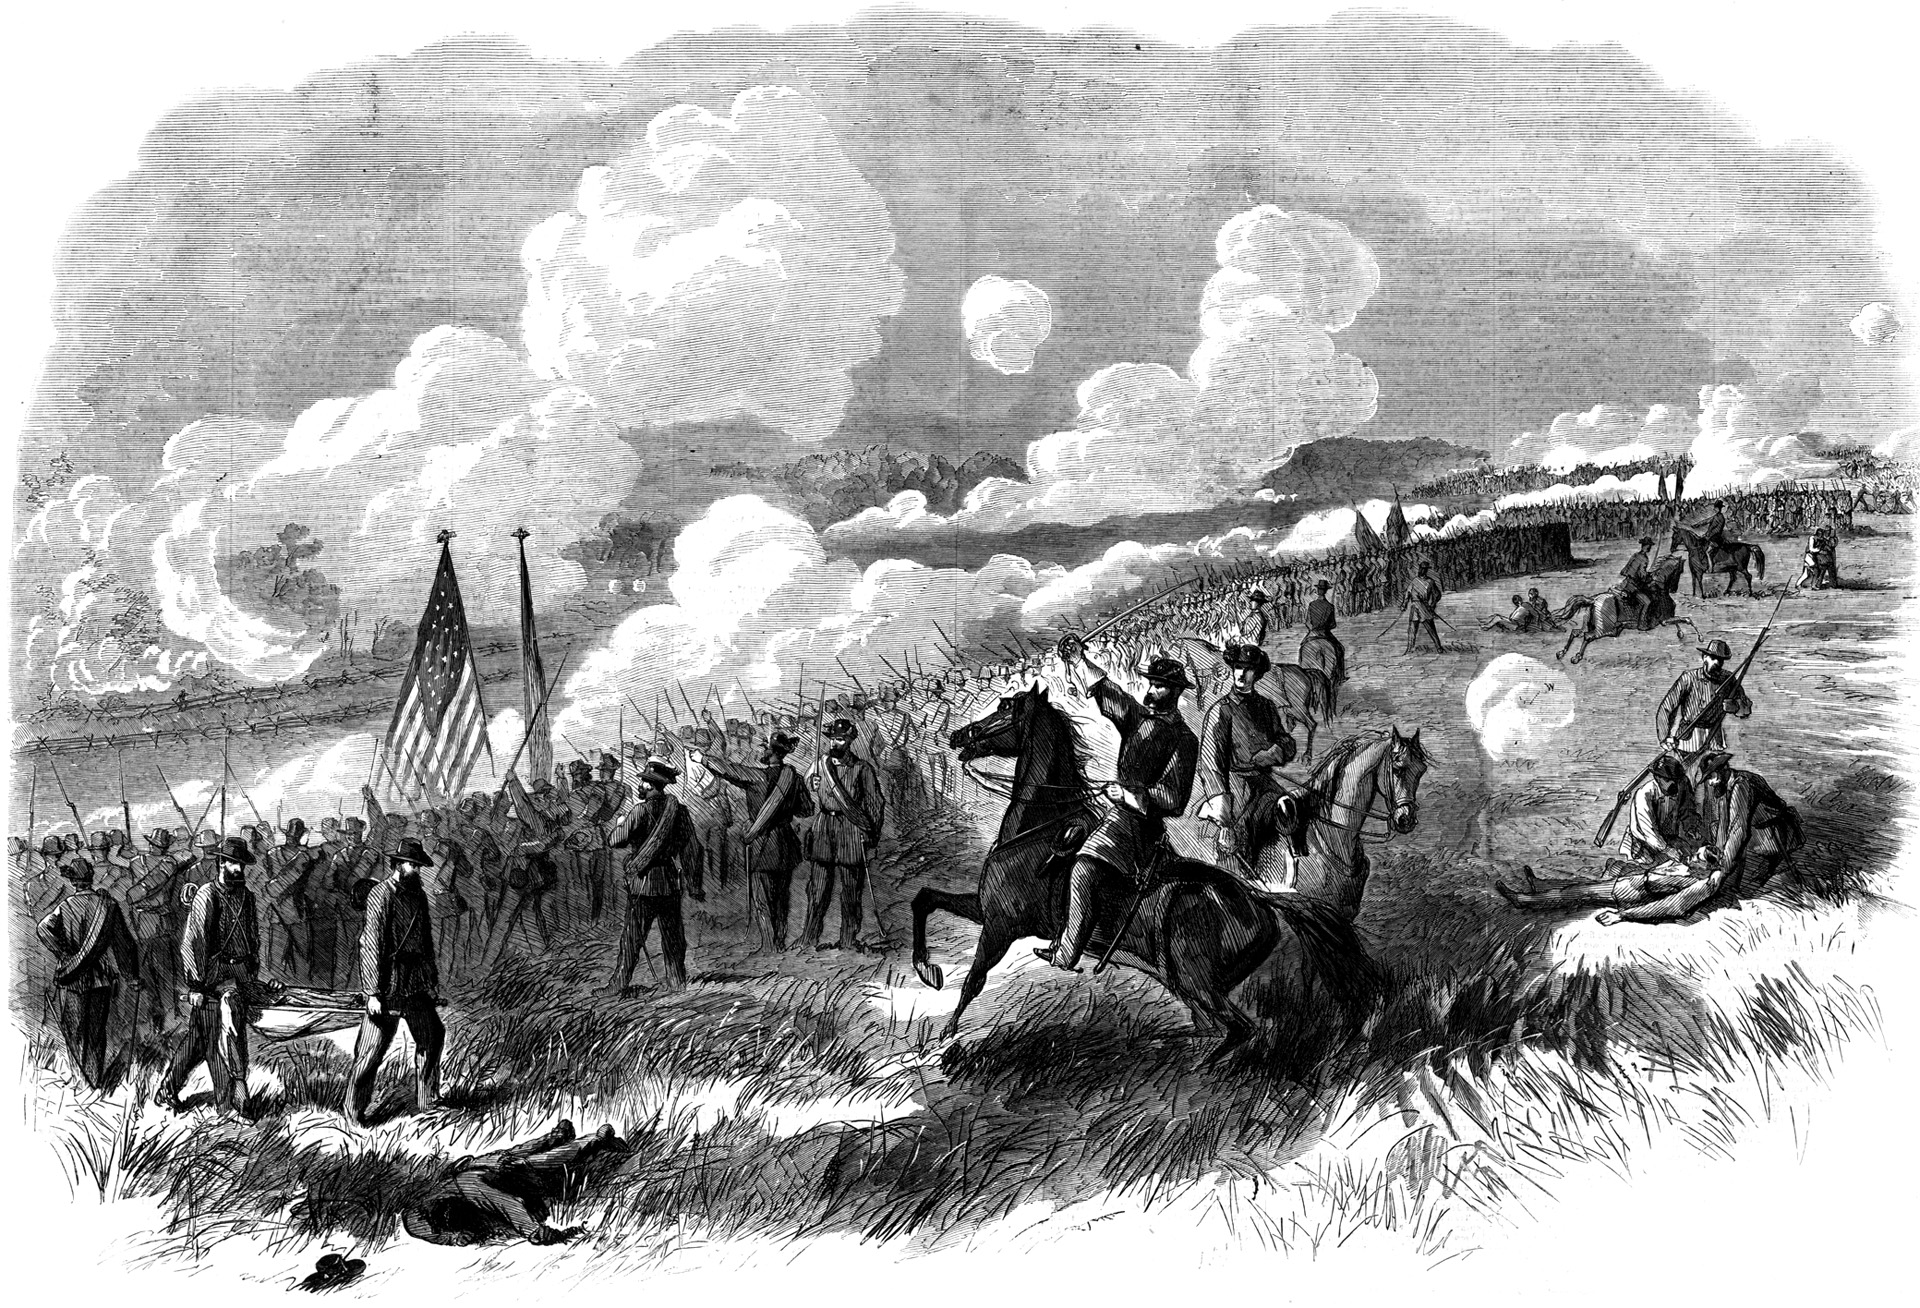 Colonel Ambrose Burnside’s brigade initiates the Union flank attack against the small body of Confederates who had rushed to Matthews Hill to check his southward advance on the morning of the one-day battle.